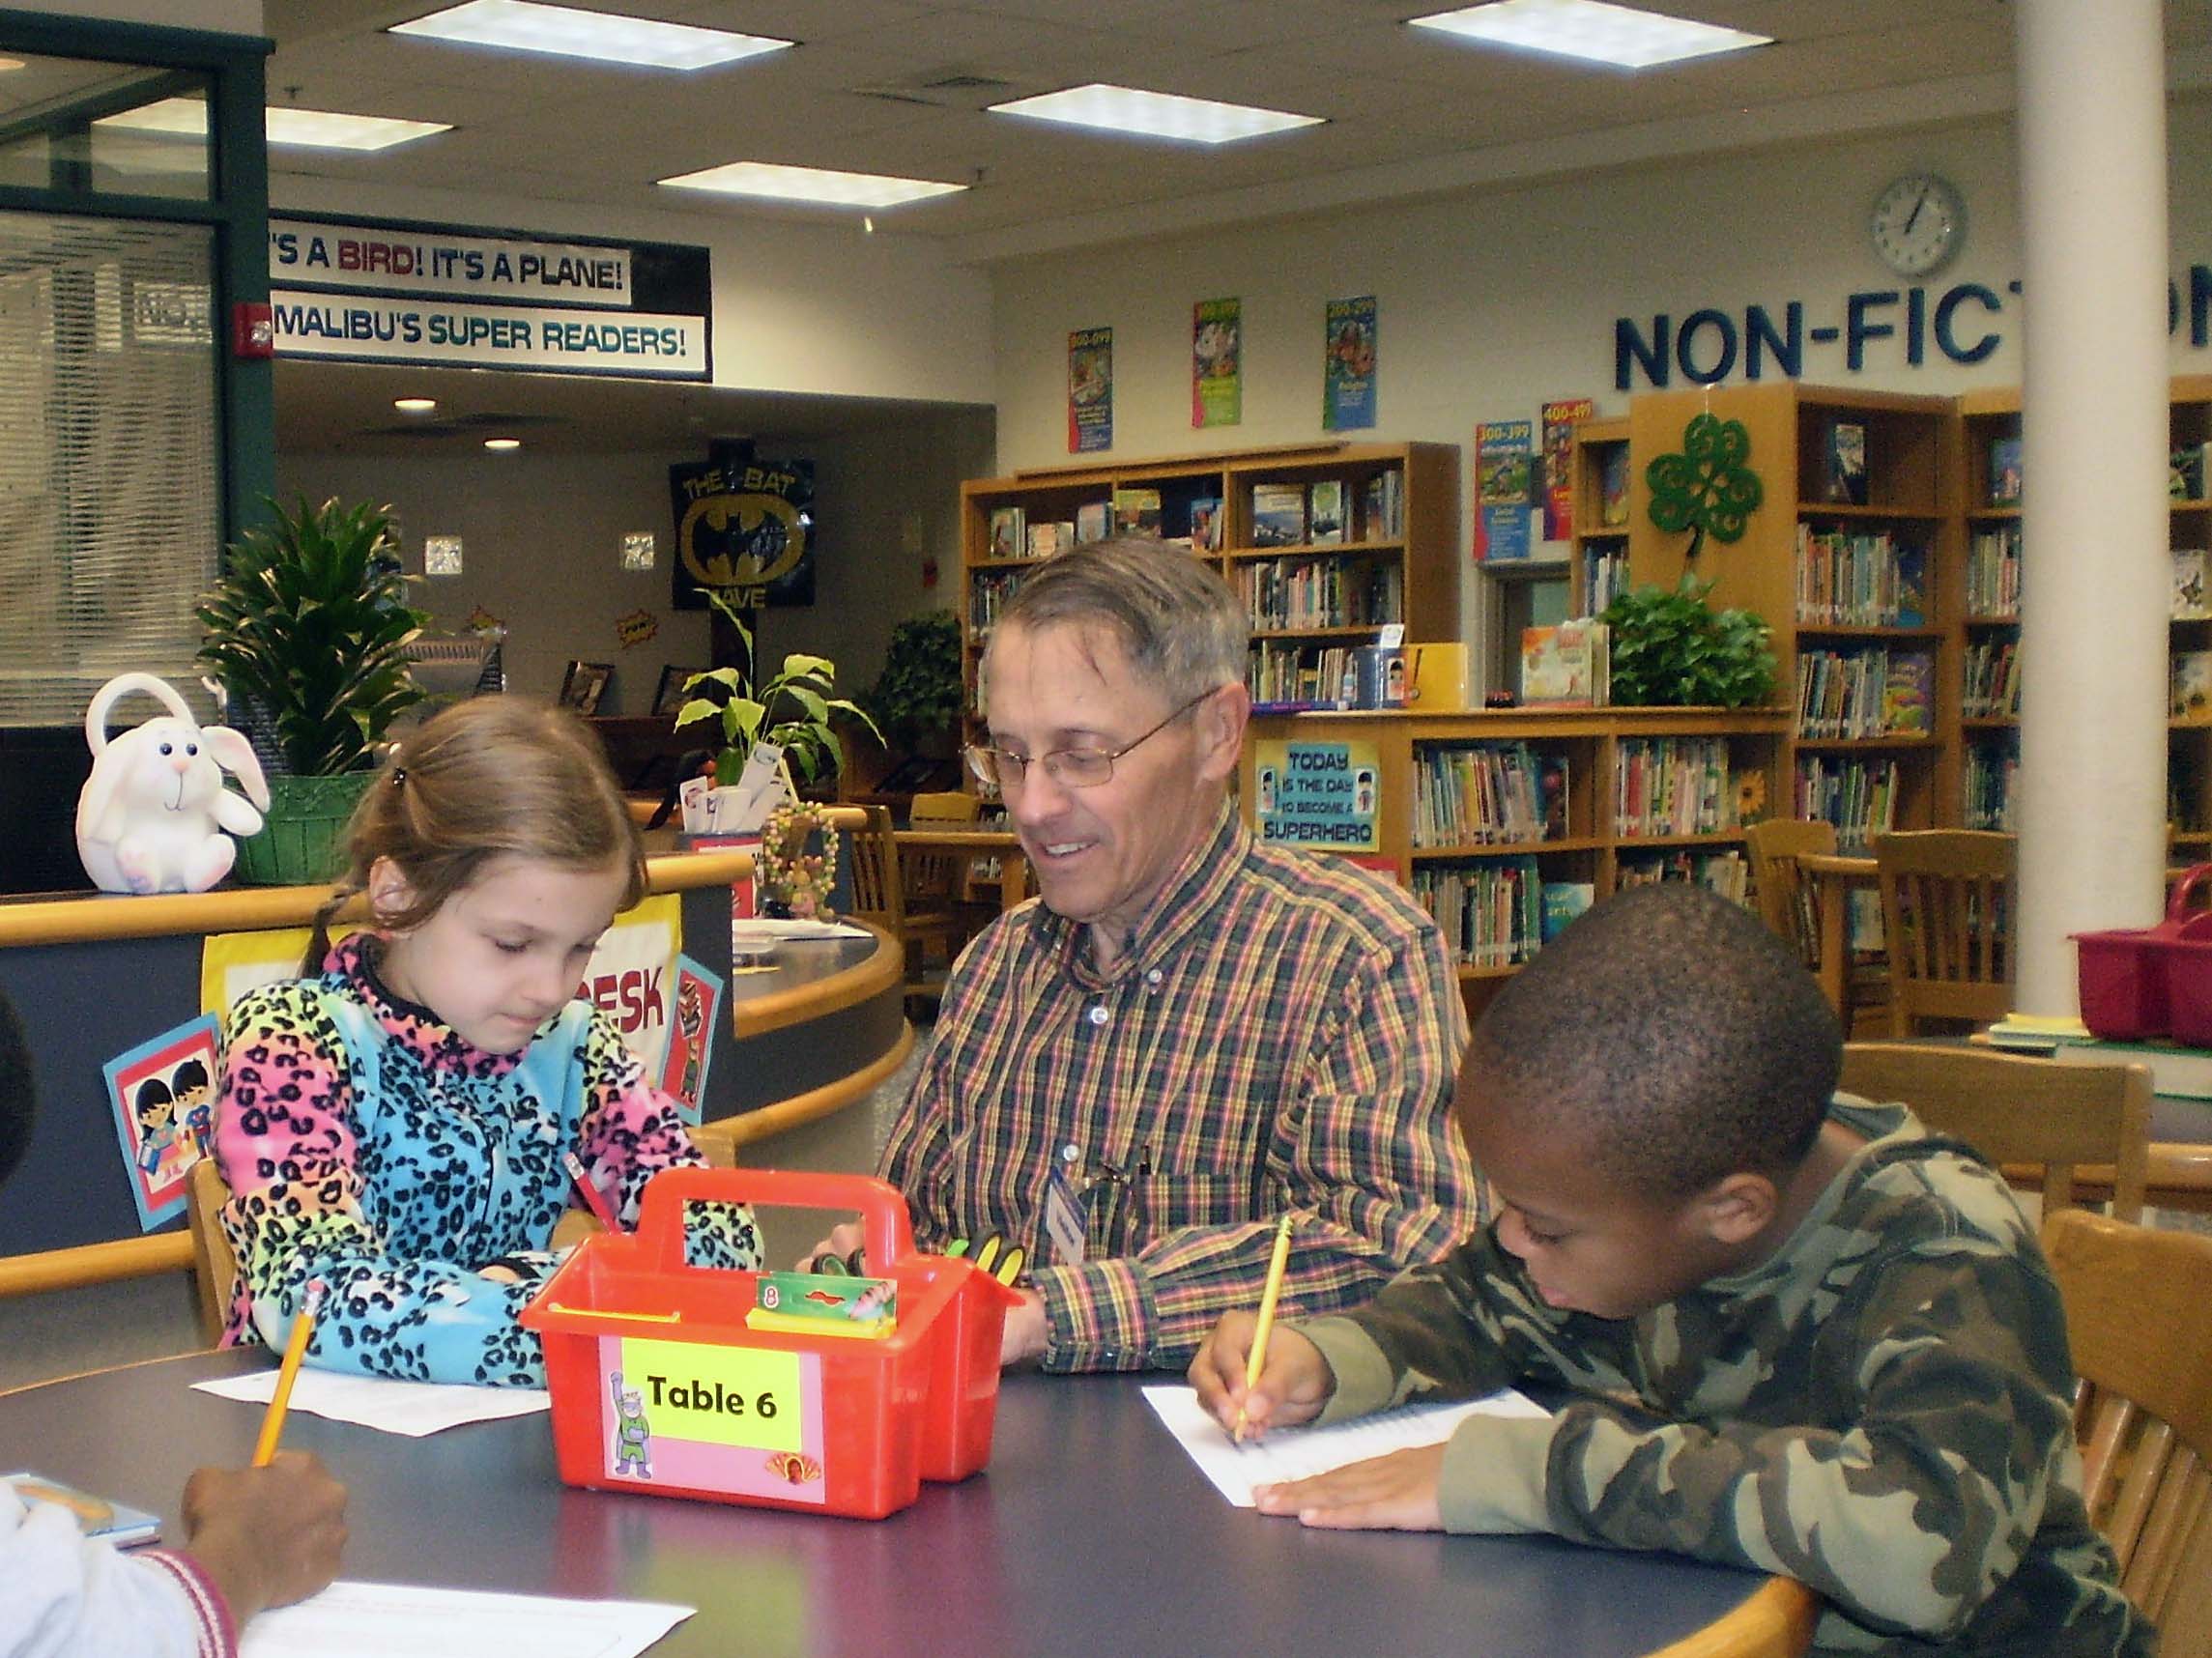 David Kern works with Malibu students in the school’s library.